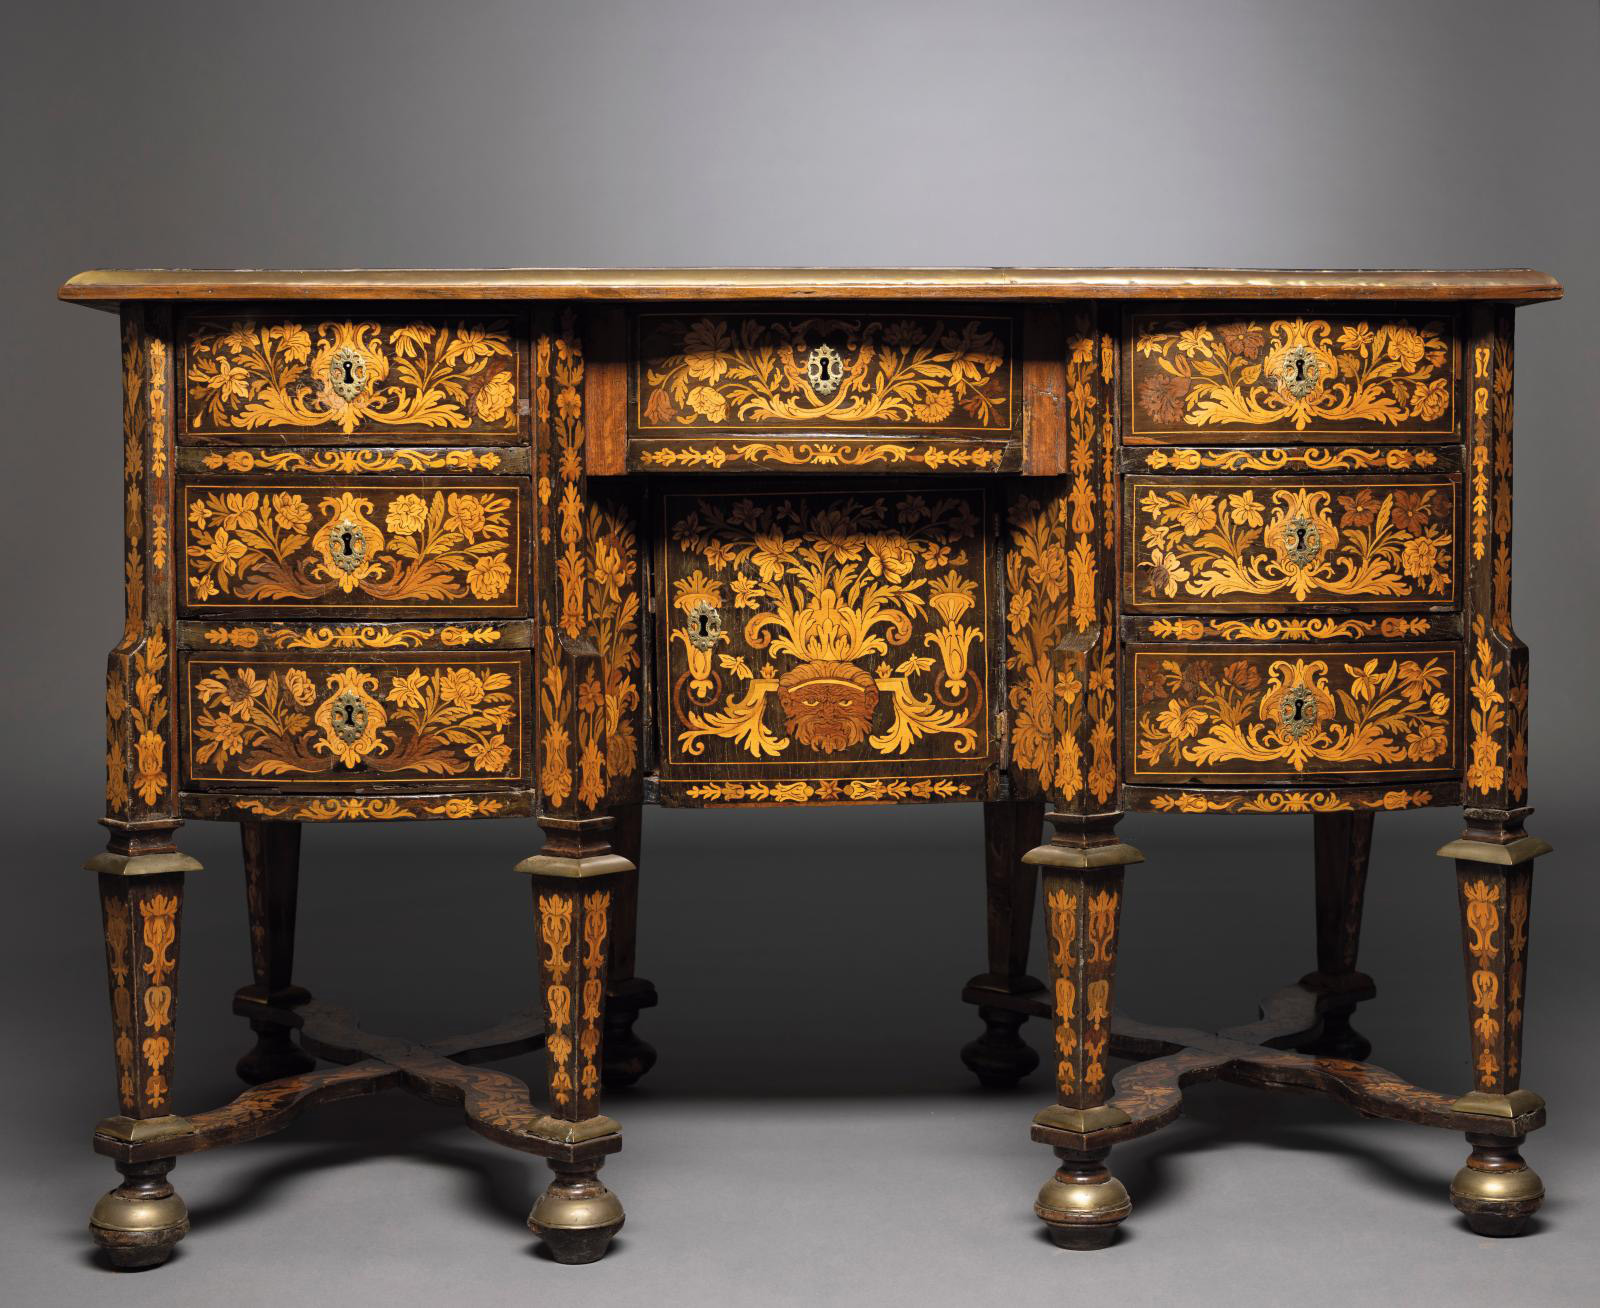 Marquetry's Glory Days Under Louis XIV